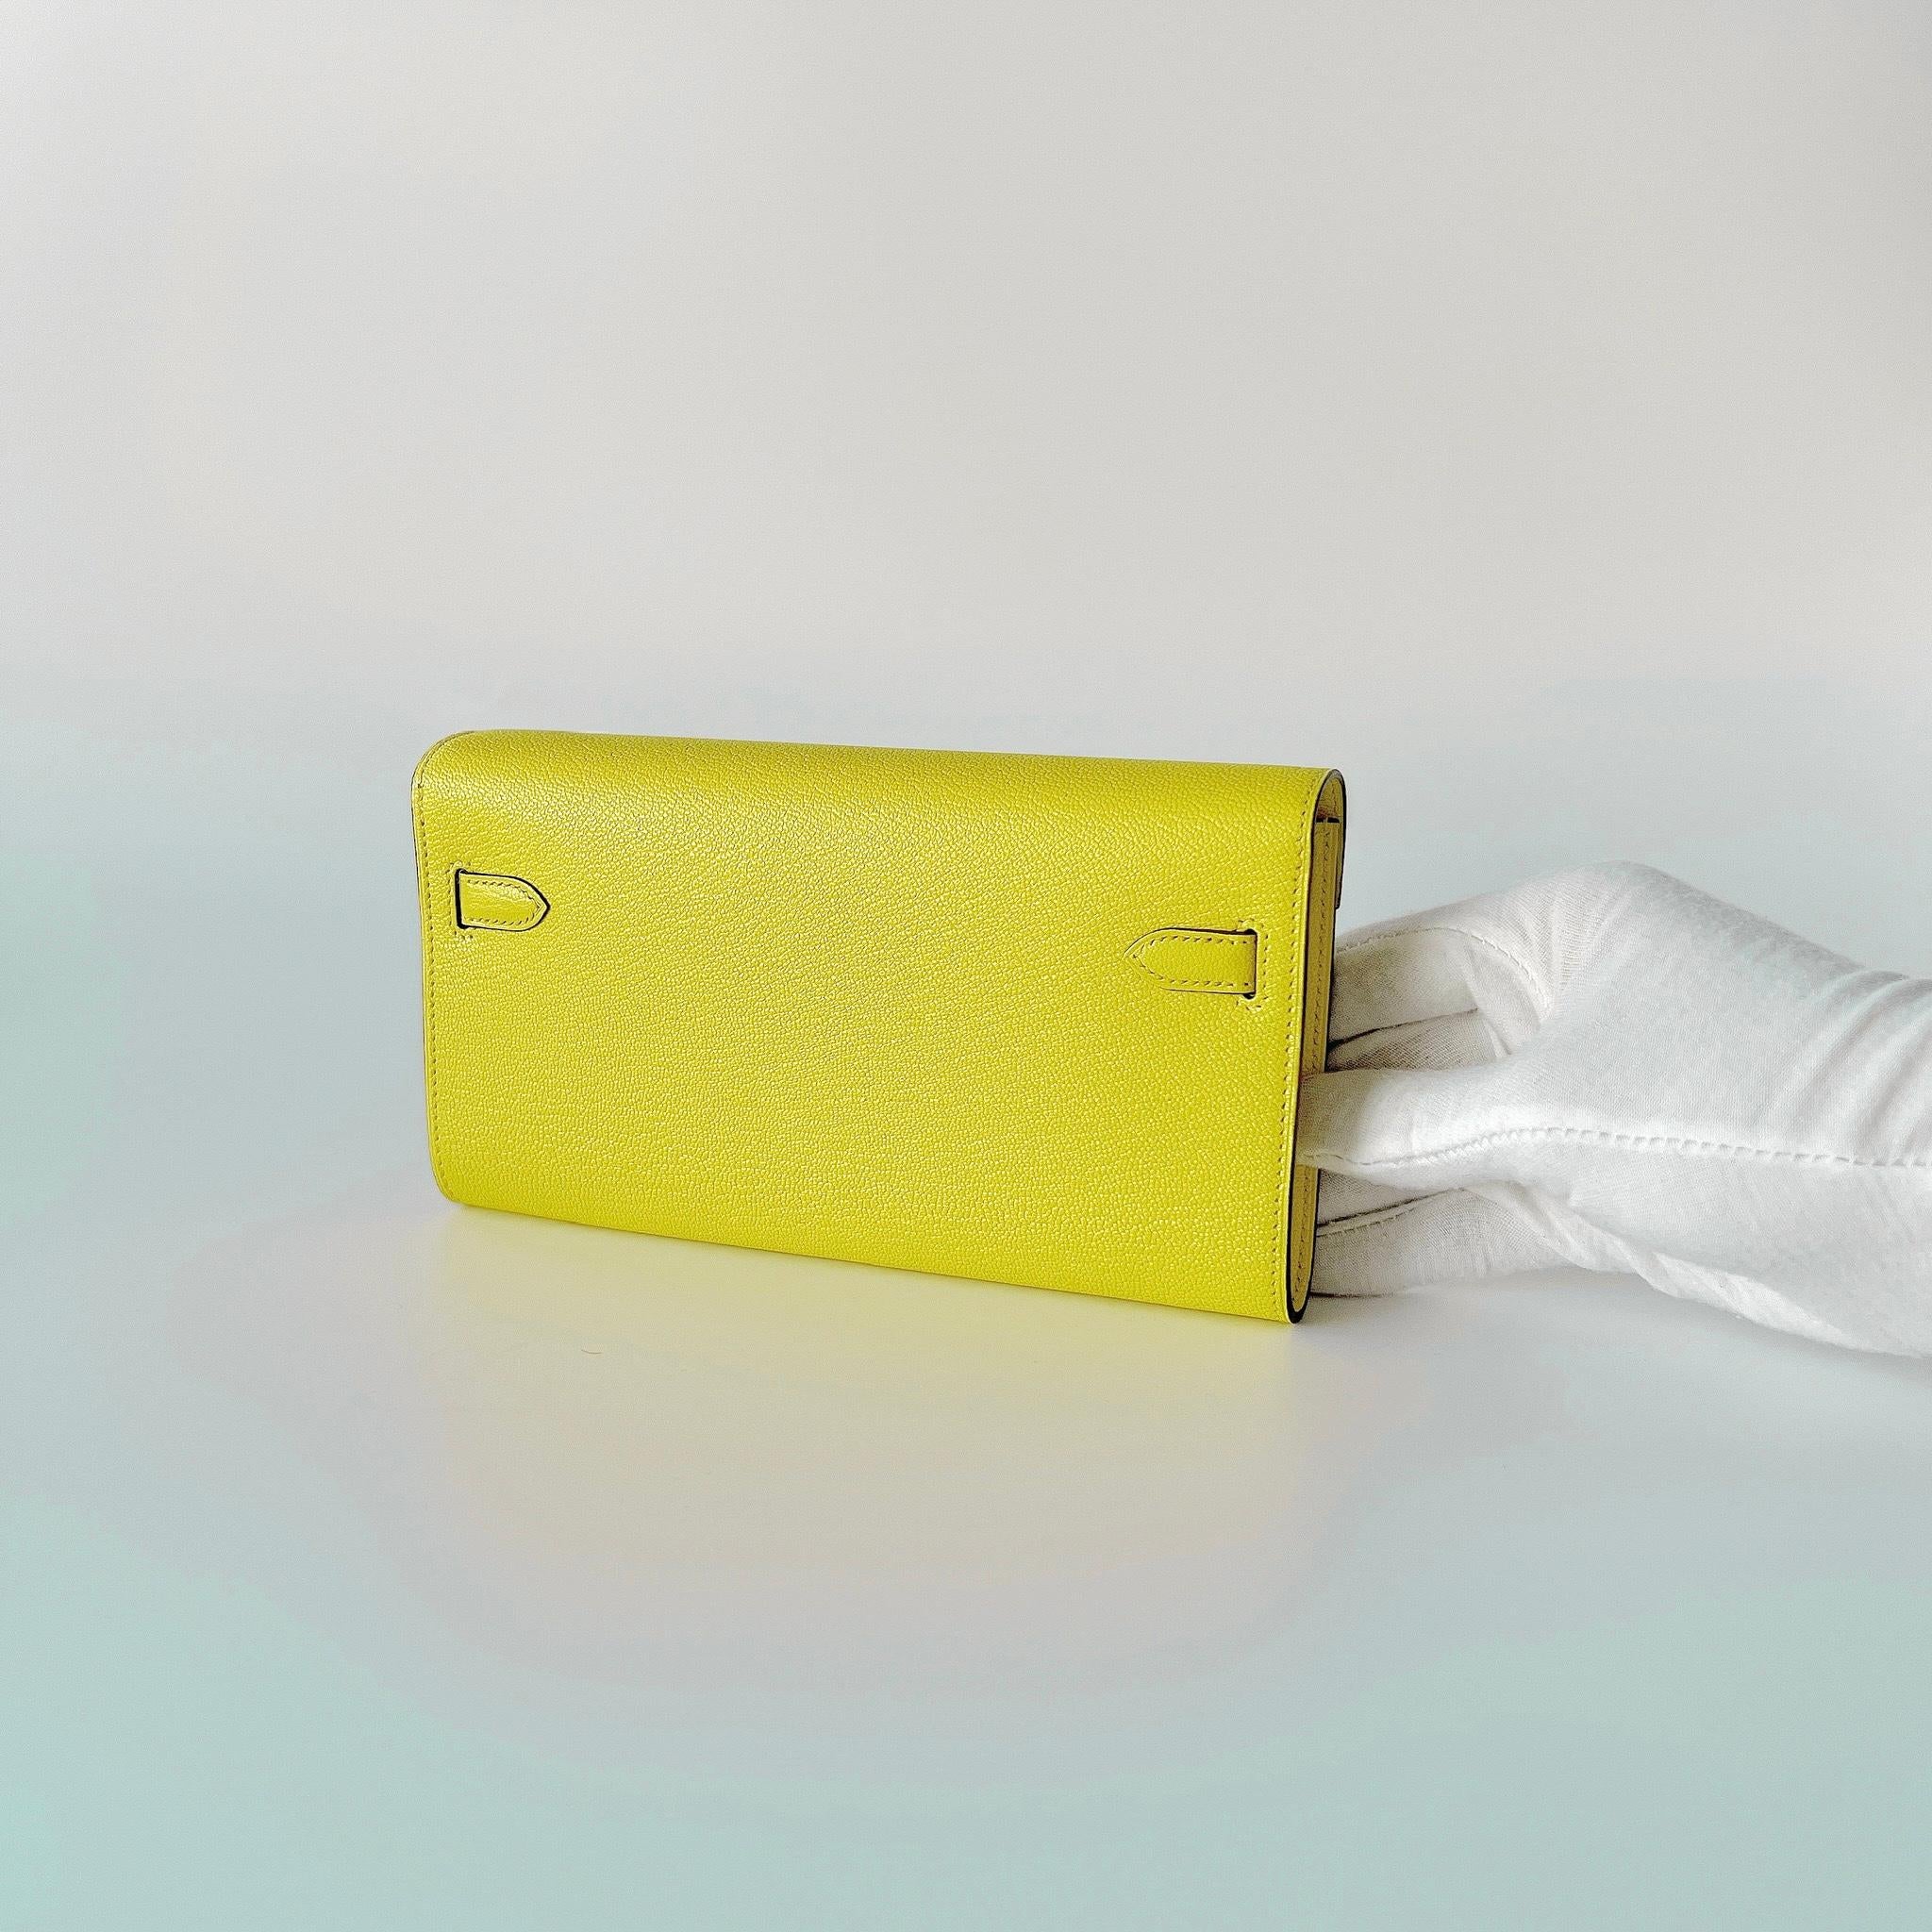 Hermes Kelly Classique To Go Wallet, In Jaune Citron Epsom Leather And Palladium 1